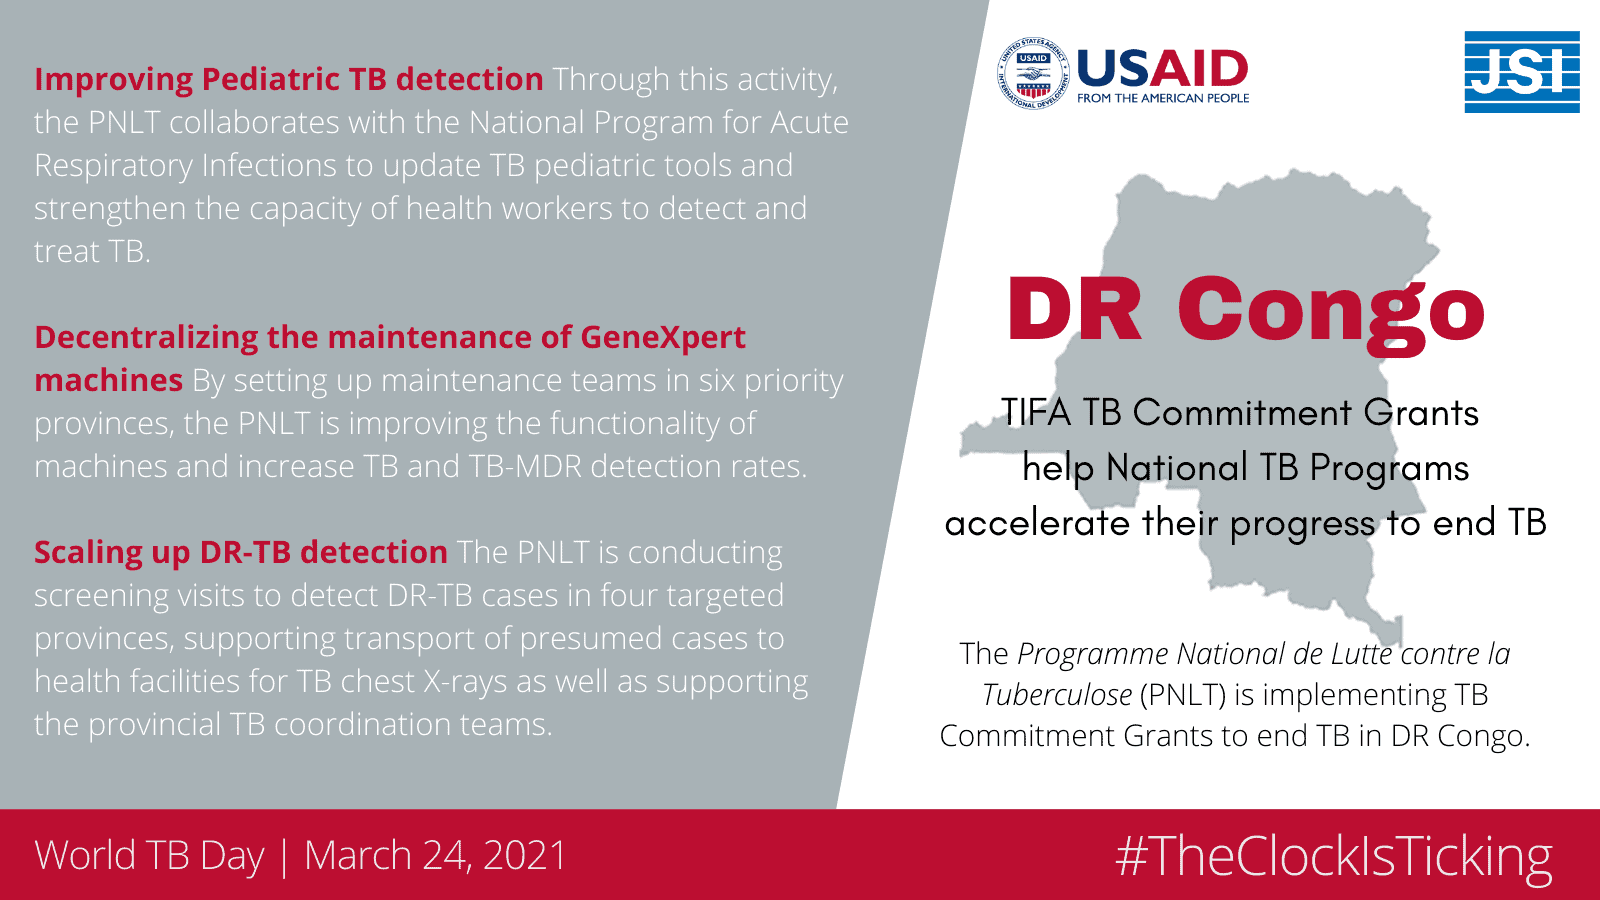 TIFA TB Commitment Grants in the DRC help National TB Programs Accelerate their Progress to end TB